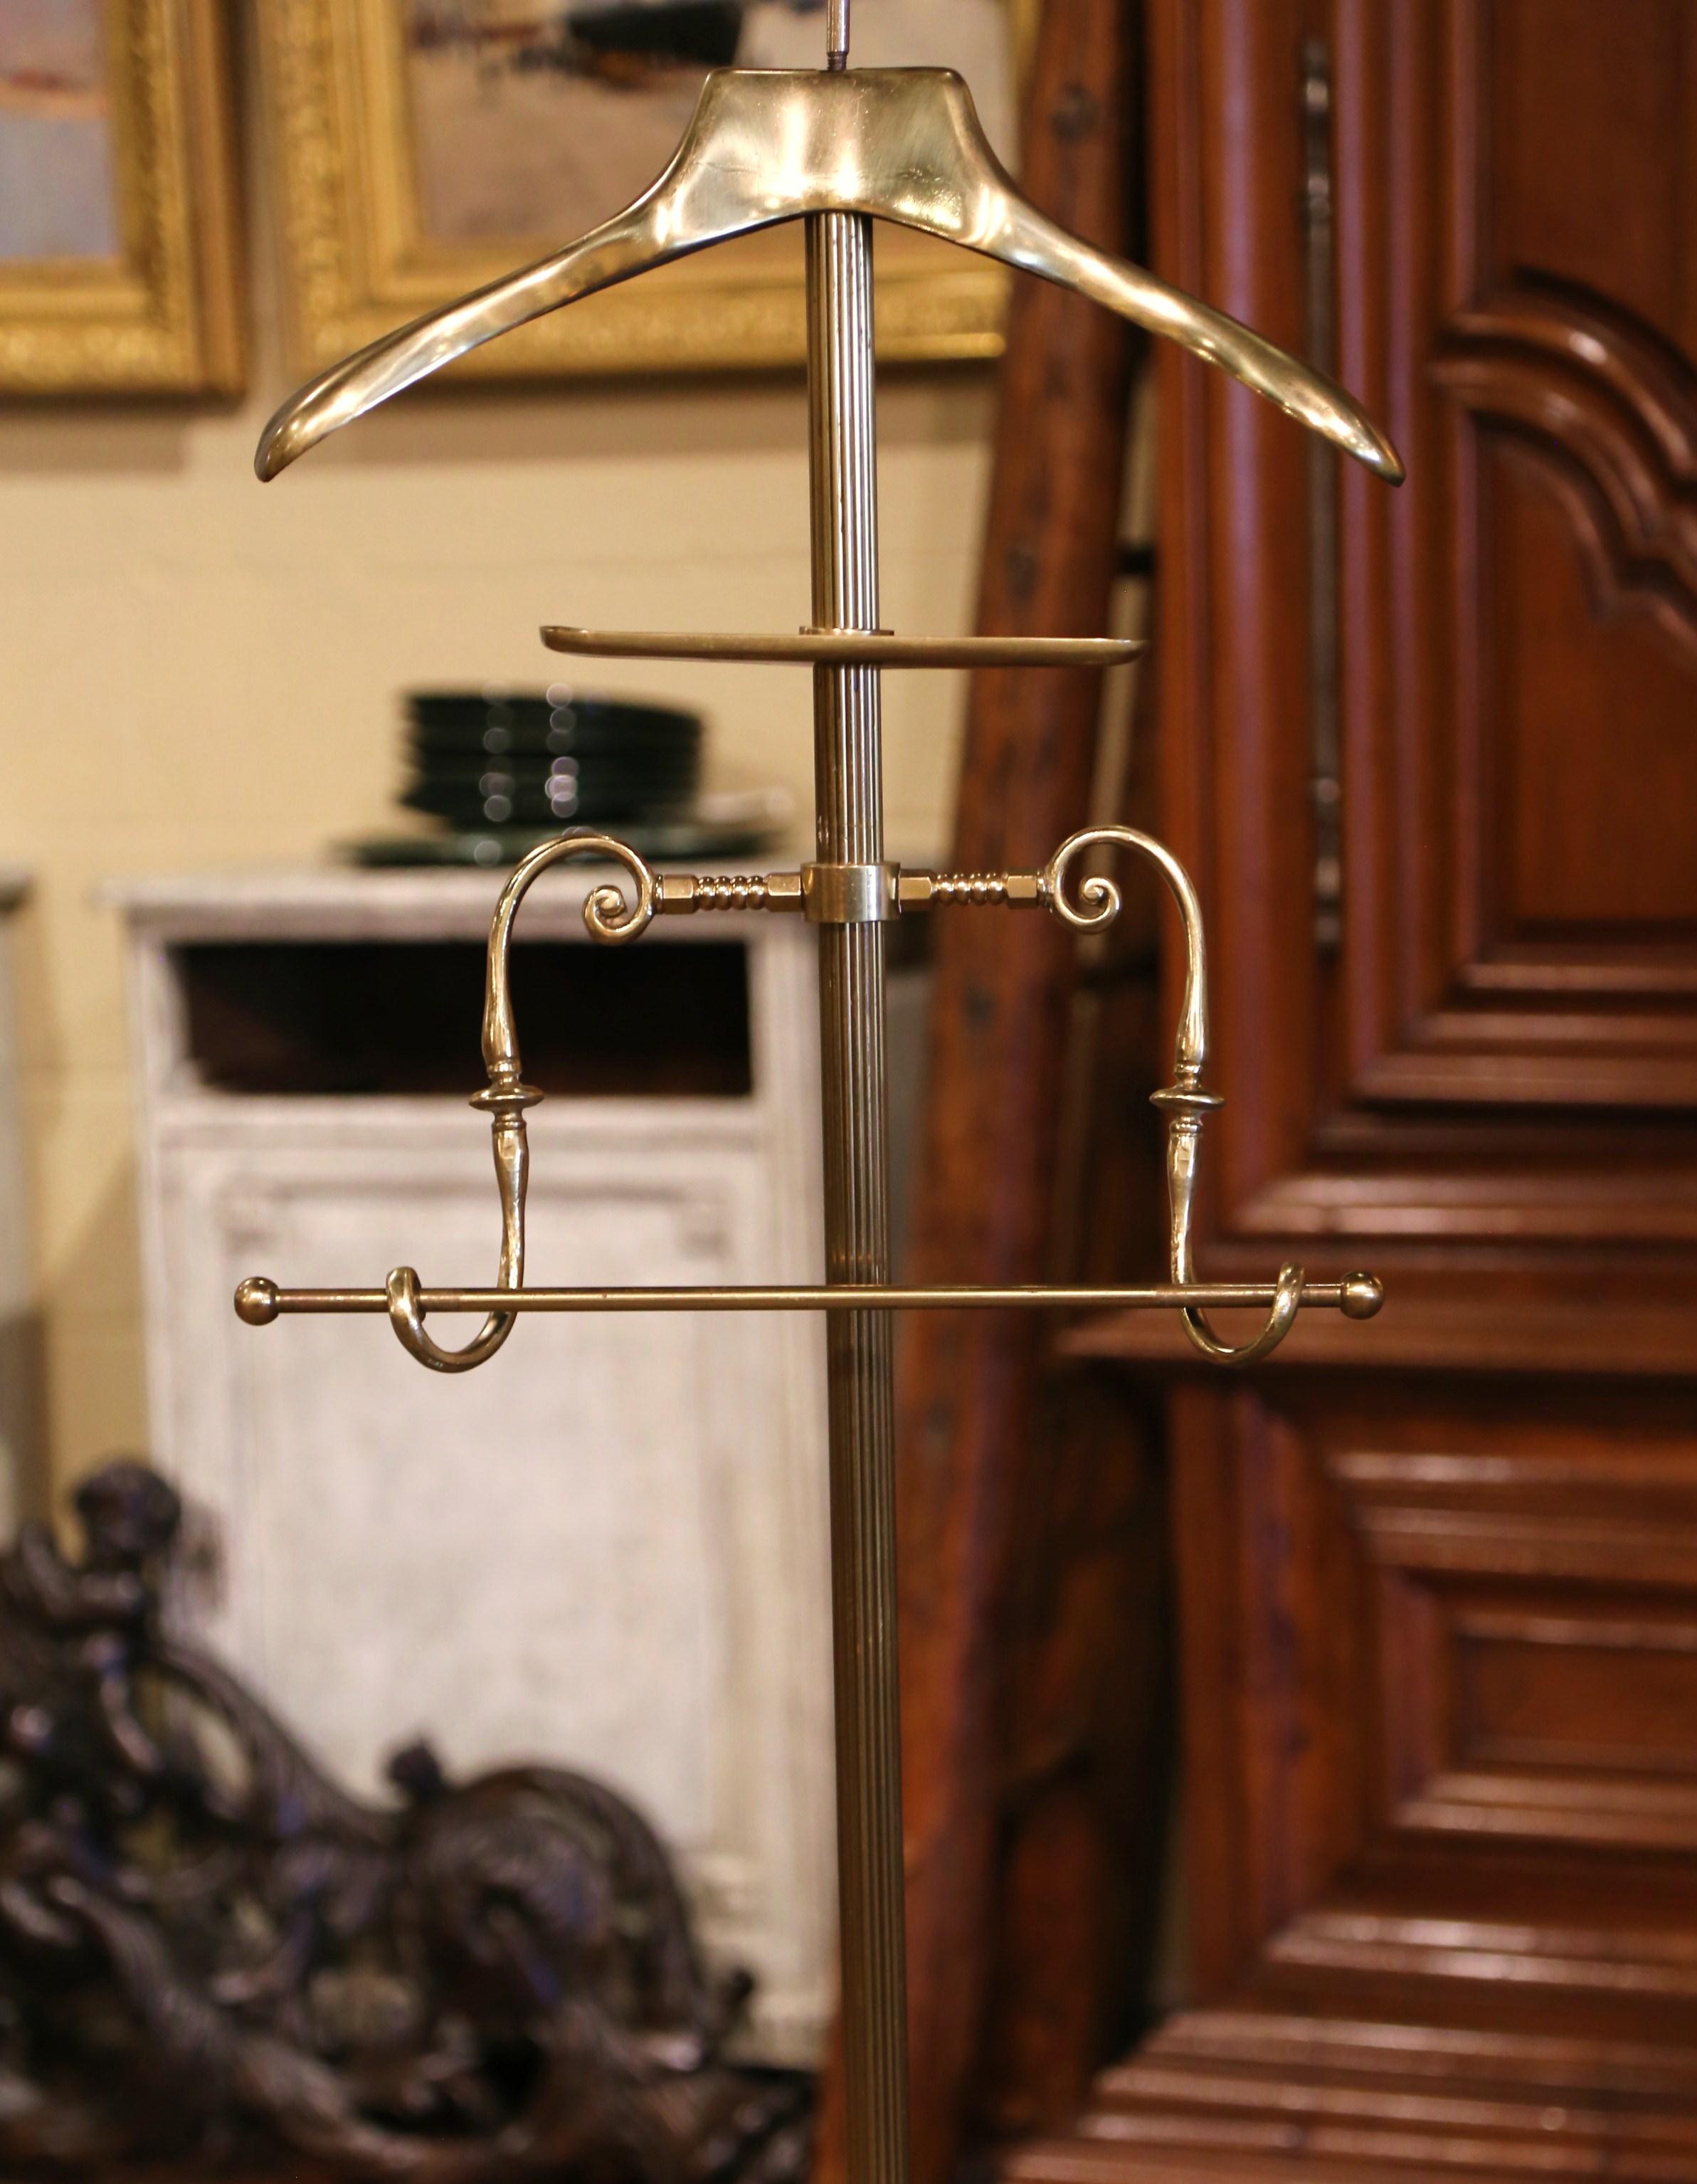 Early 20th Century French Gilt Brass Jacket Hanger Bathroom Coat Stand For Sale 2